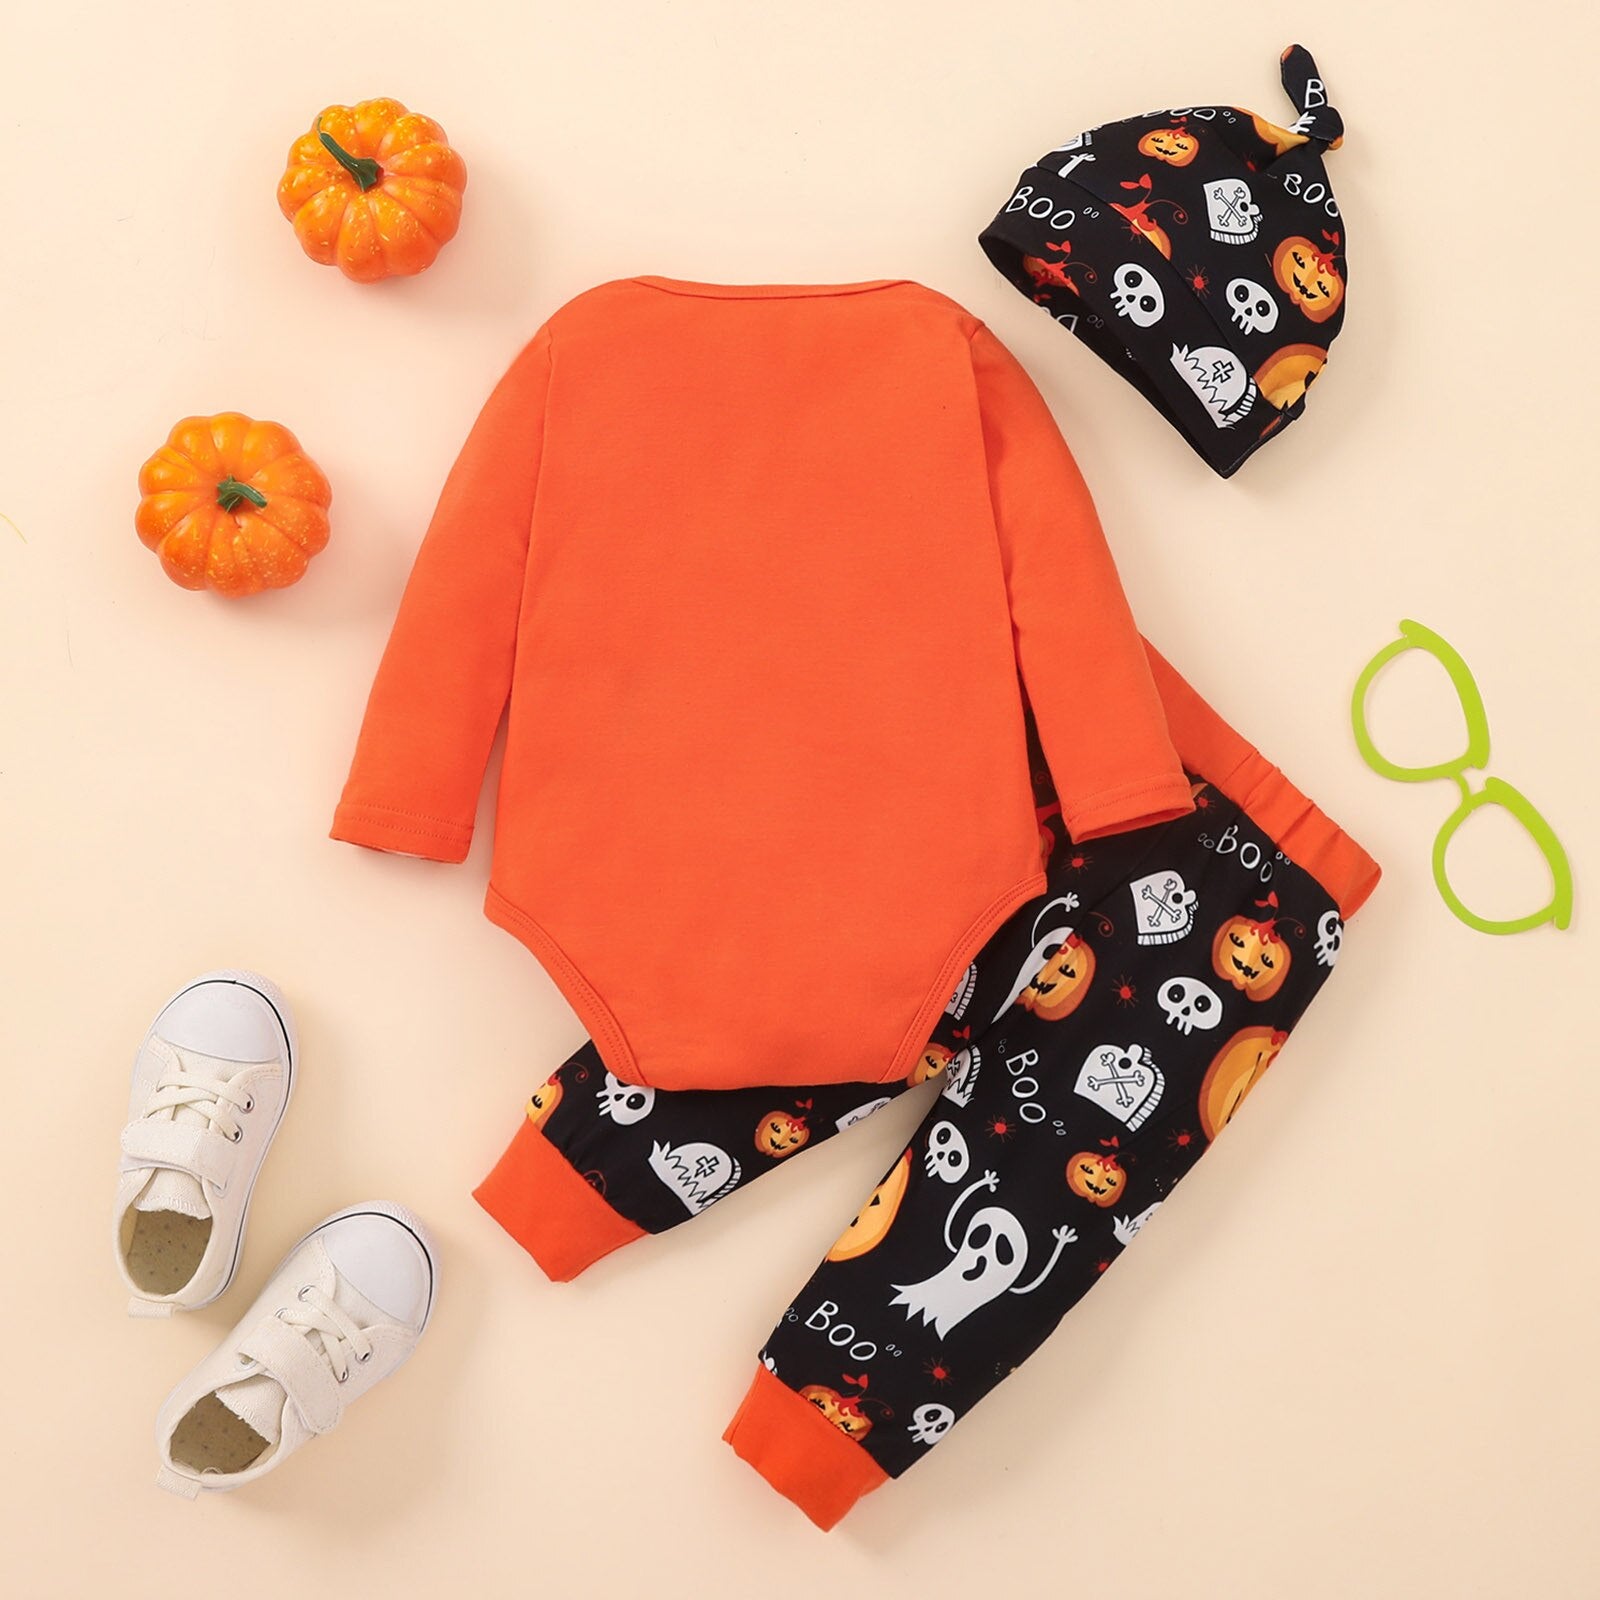 Infant Baby Unisex Halloween Print Costumes Long Sleeve Romper,Long Pants &Hat outfit